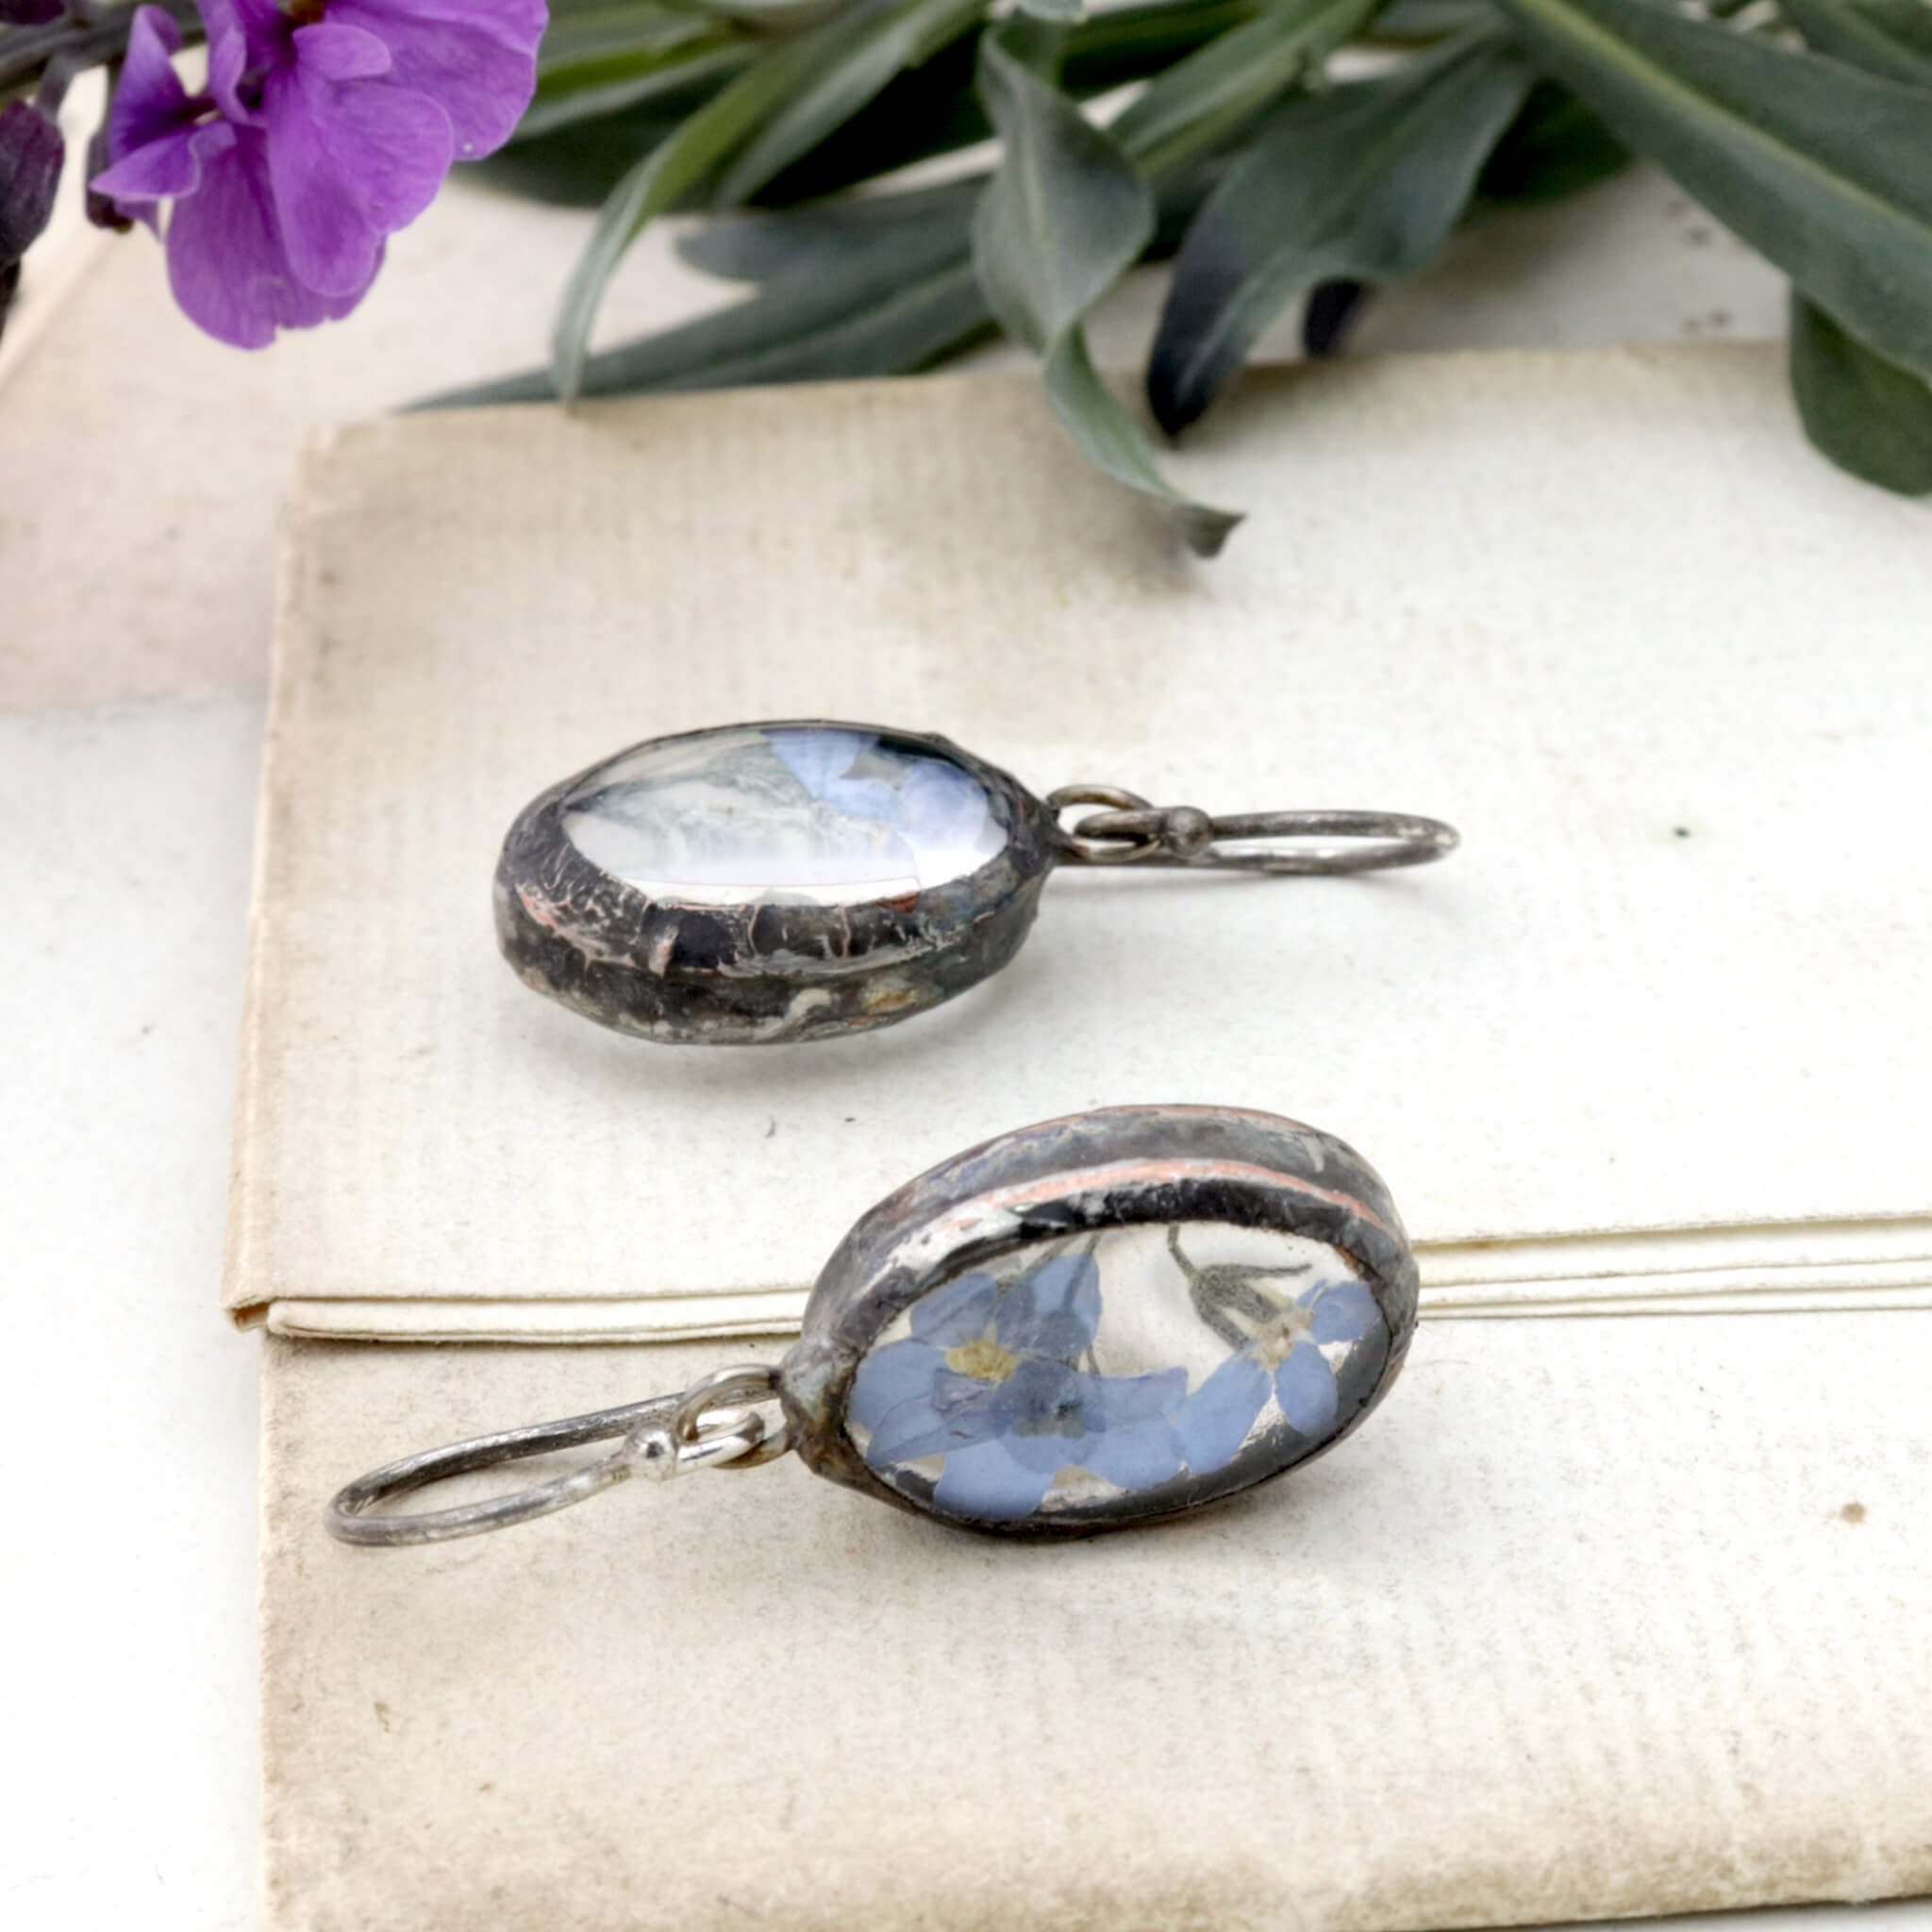 Earrings with real forget-me-nots lying on an old letter